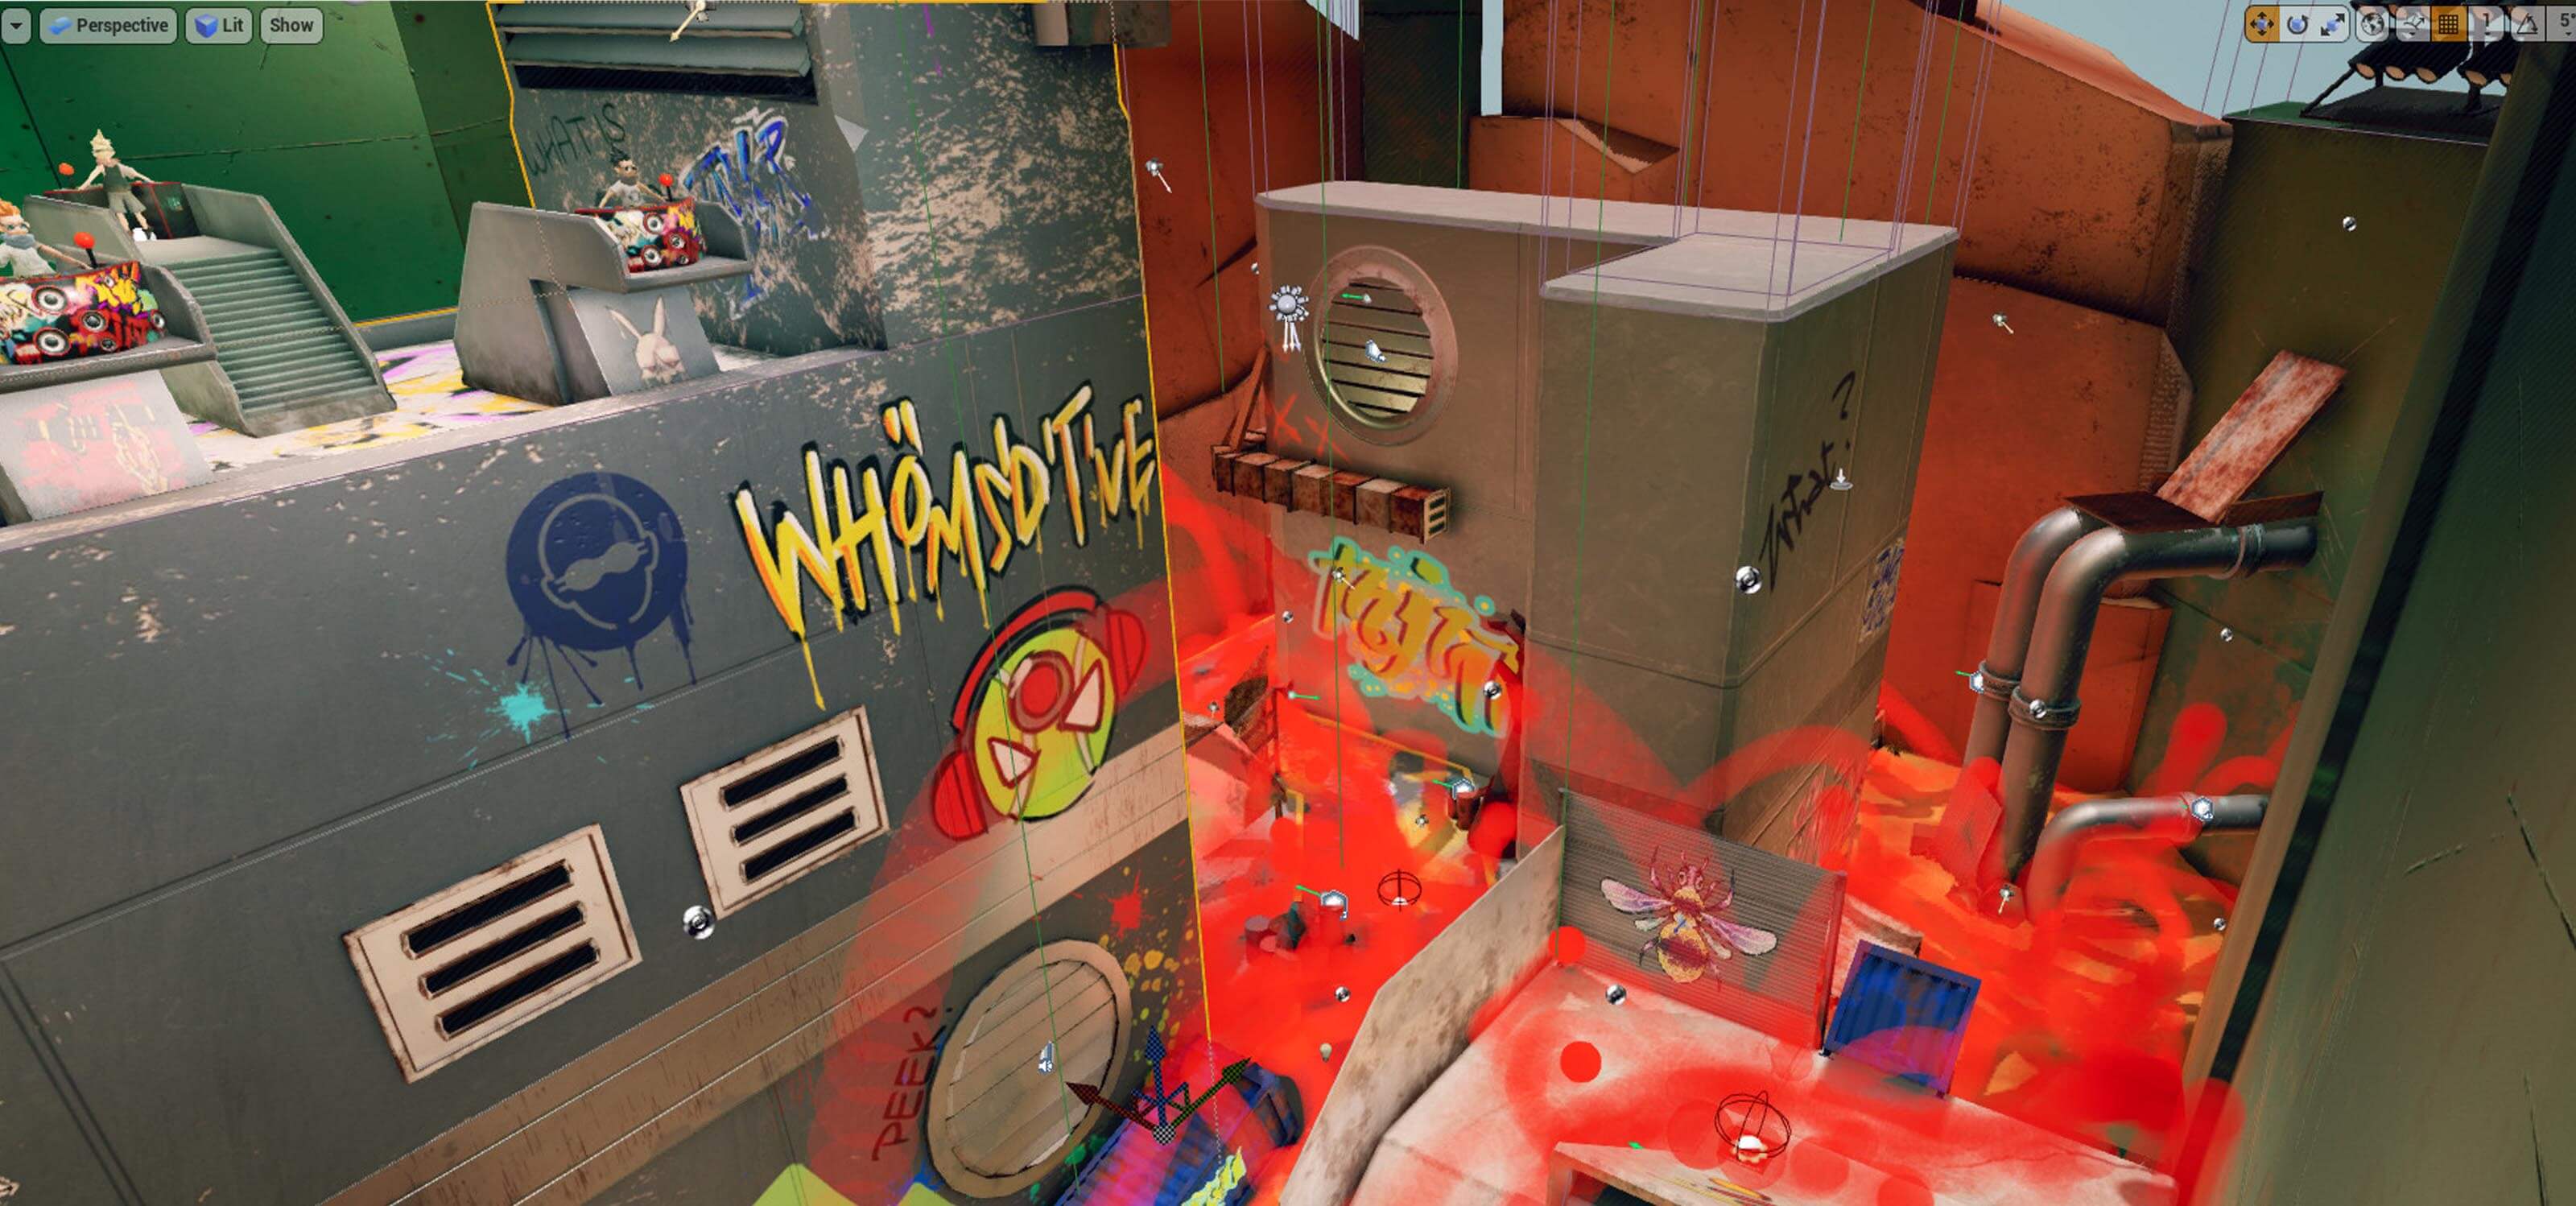 In-game screenshot of rusty, silver buildings splashed with colorful graffiti.